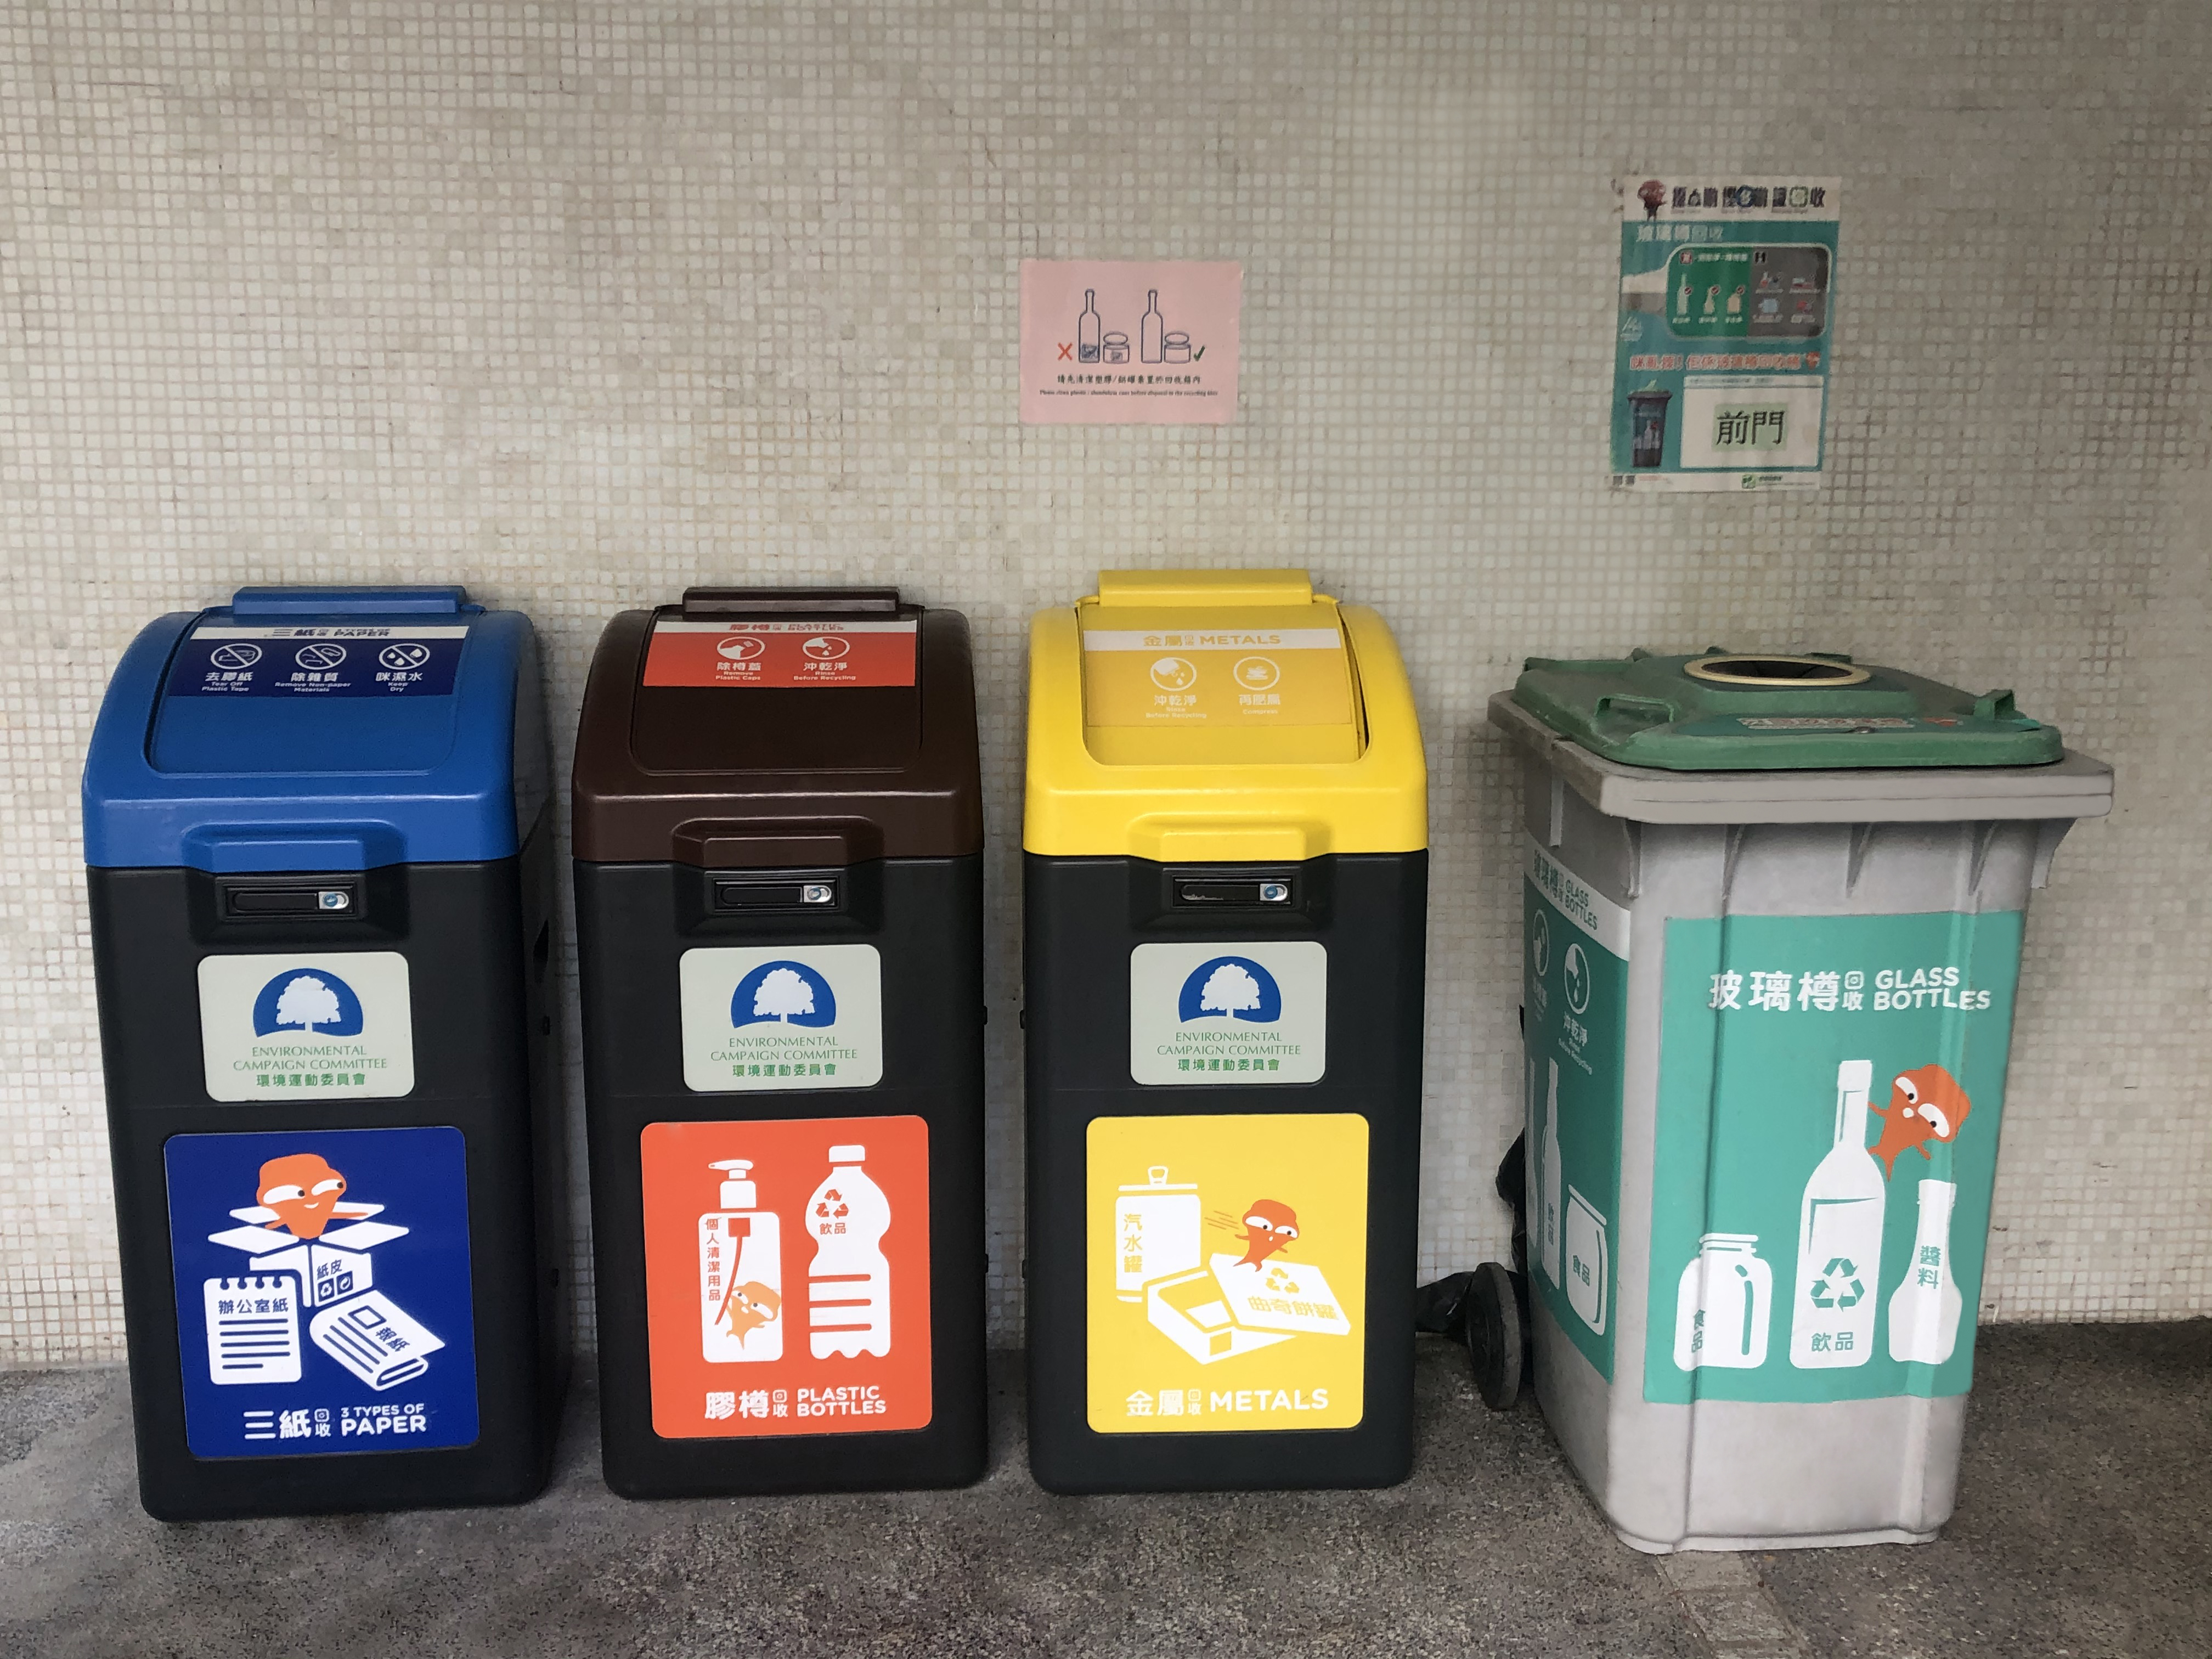 Waste Separation Bins for collecting different types of recyclables, including paper, metals, plastics and glass bottles